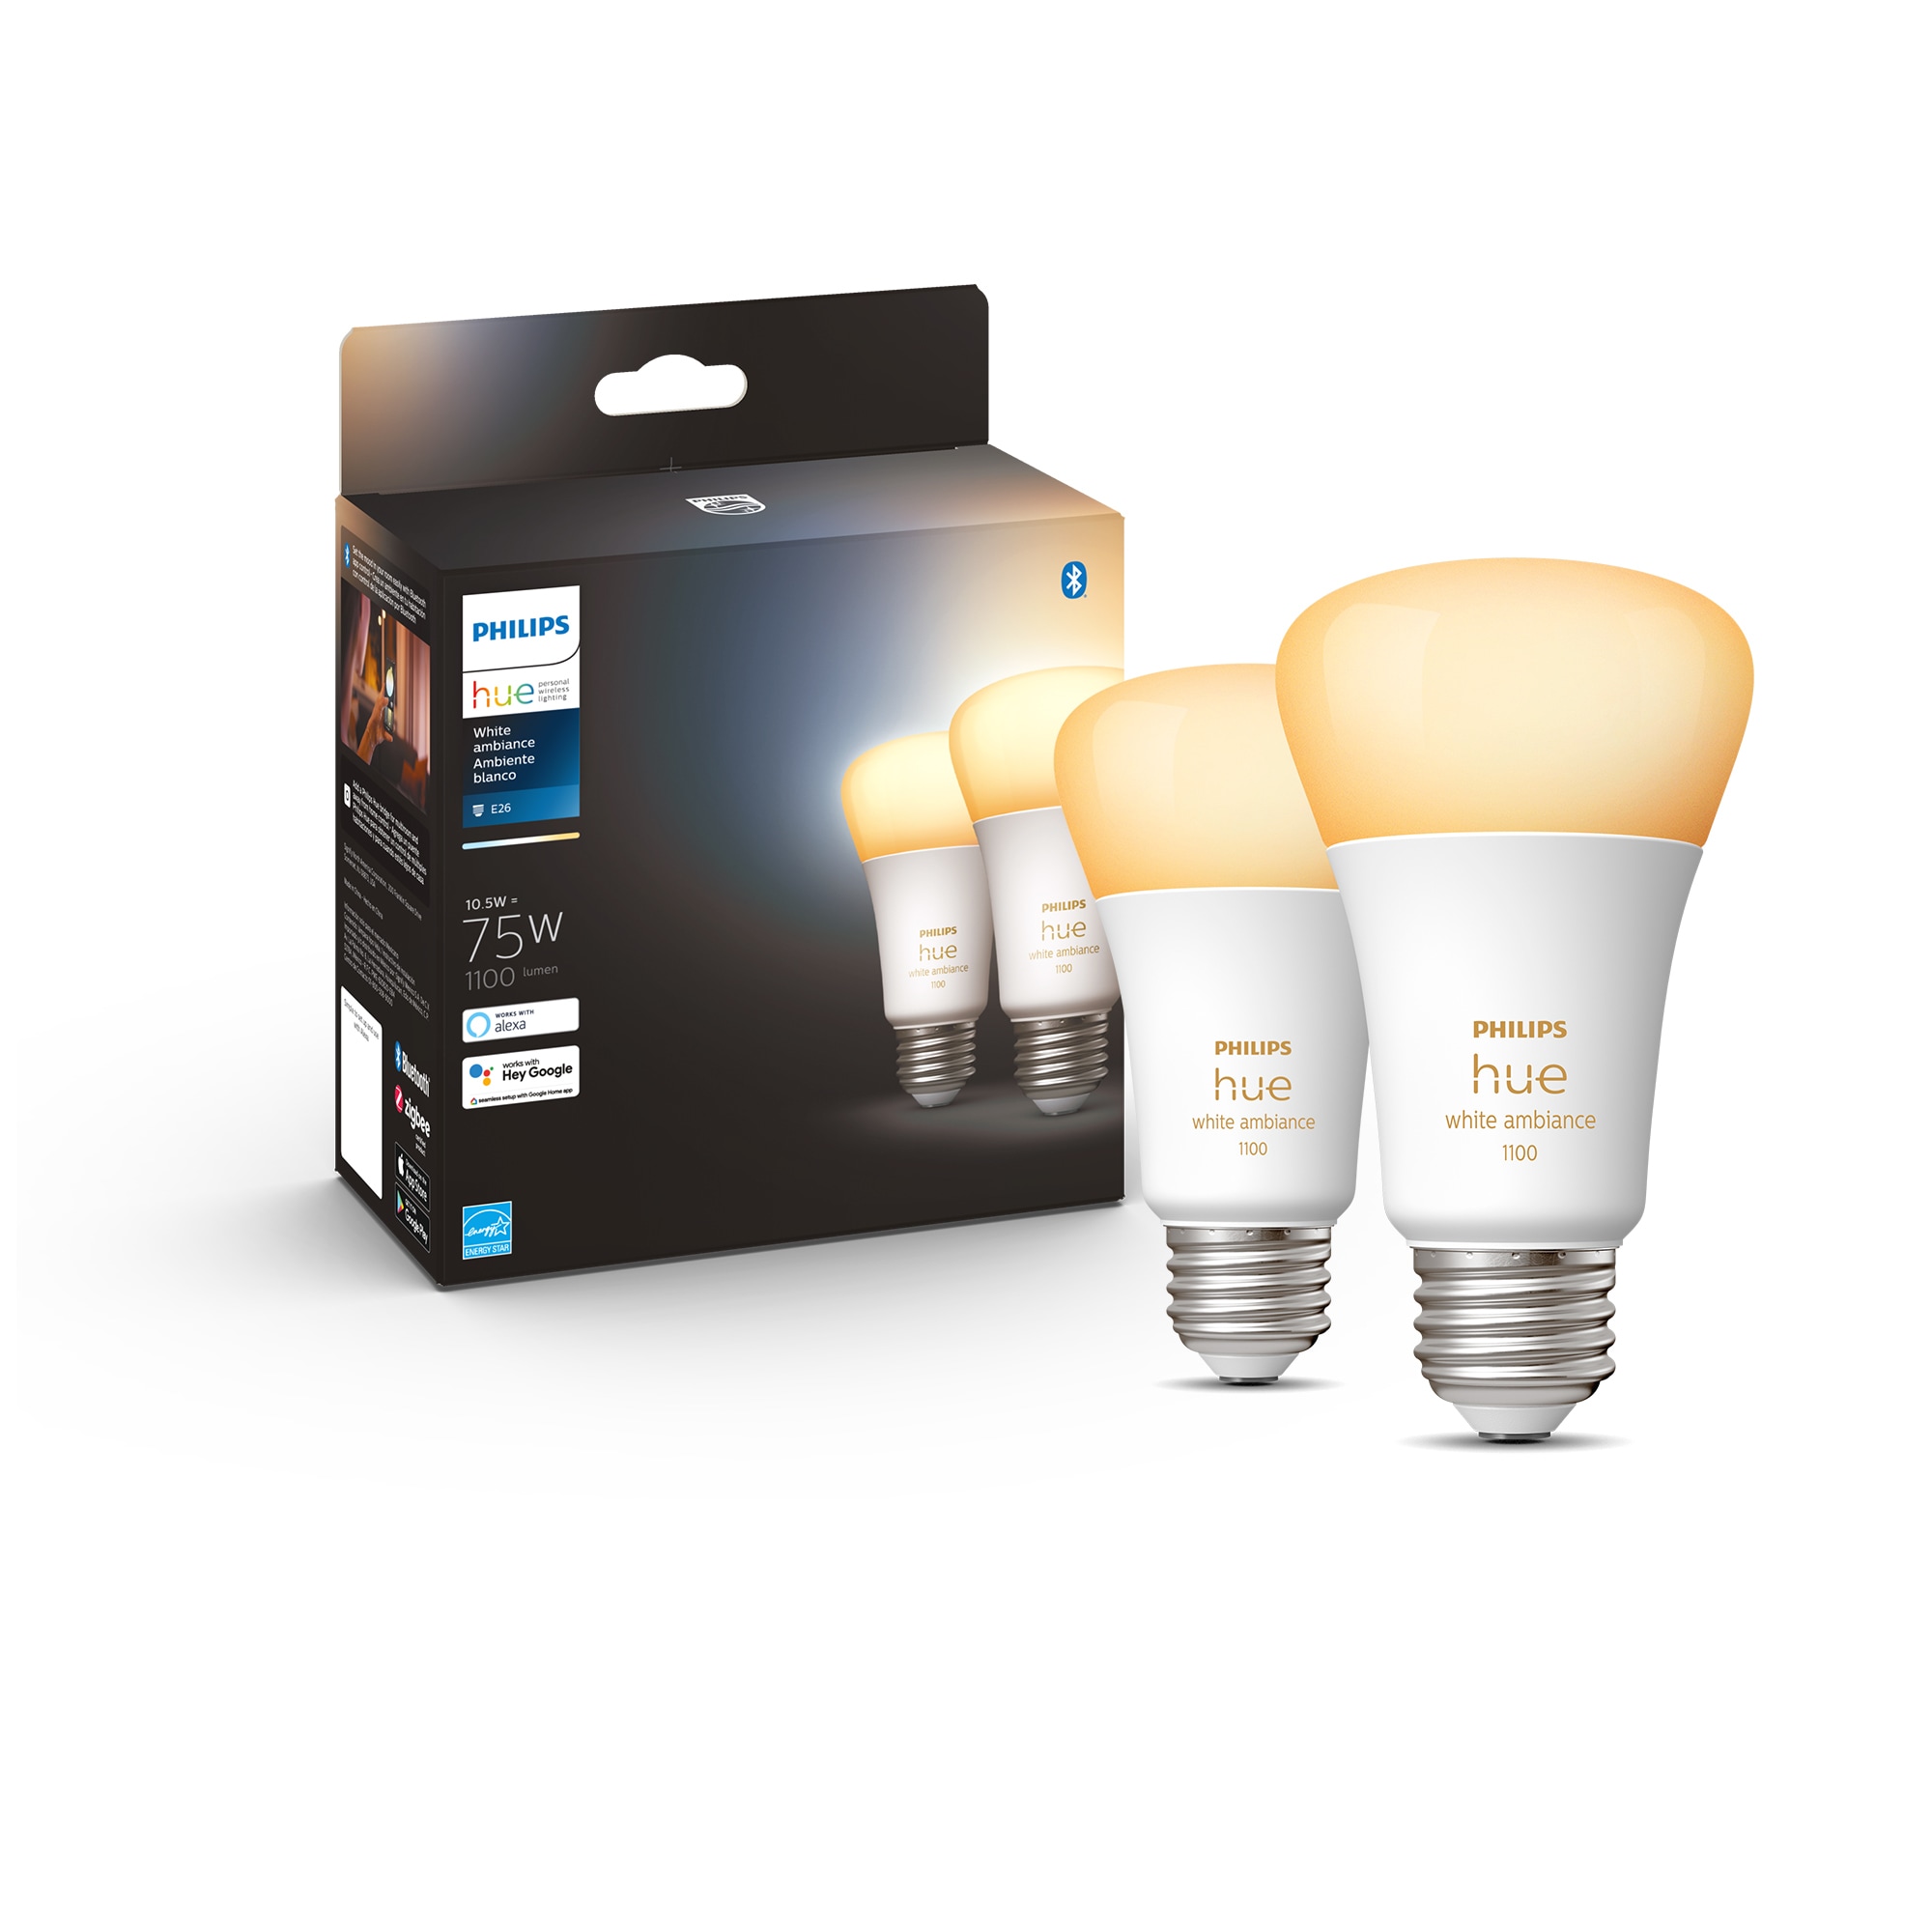 Hue EQ A19 Tunable White E26 Dimmable LED Light Bulb (2-Pack) at Lowes.com